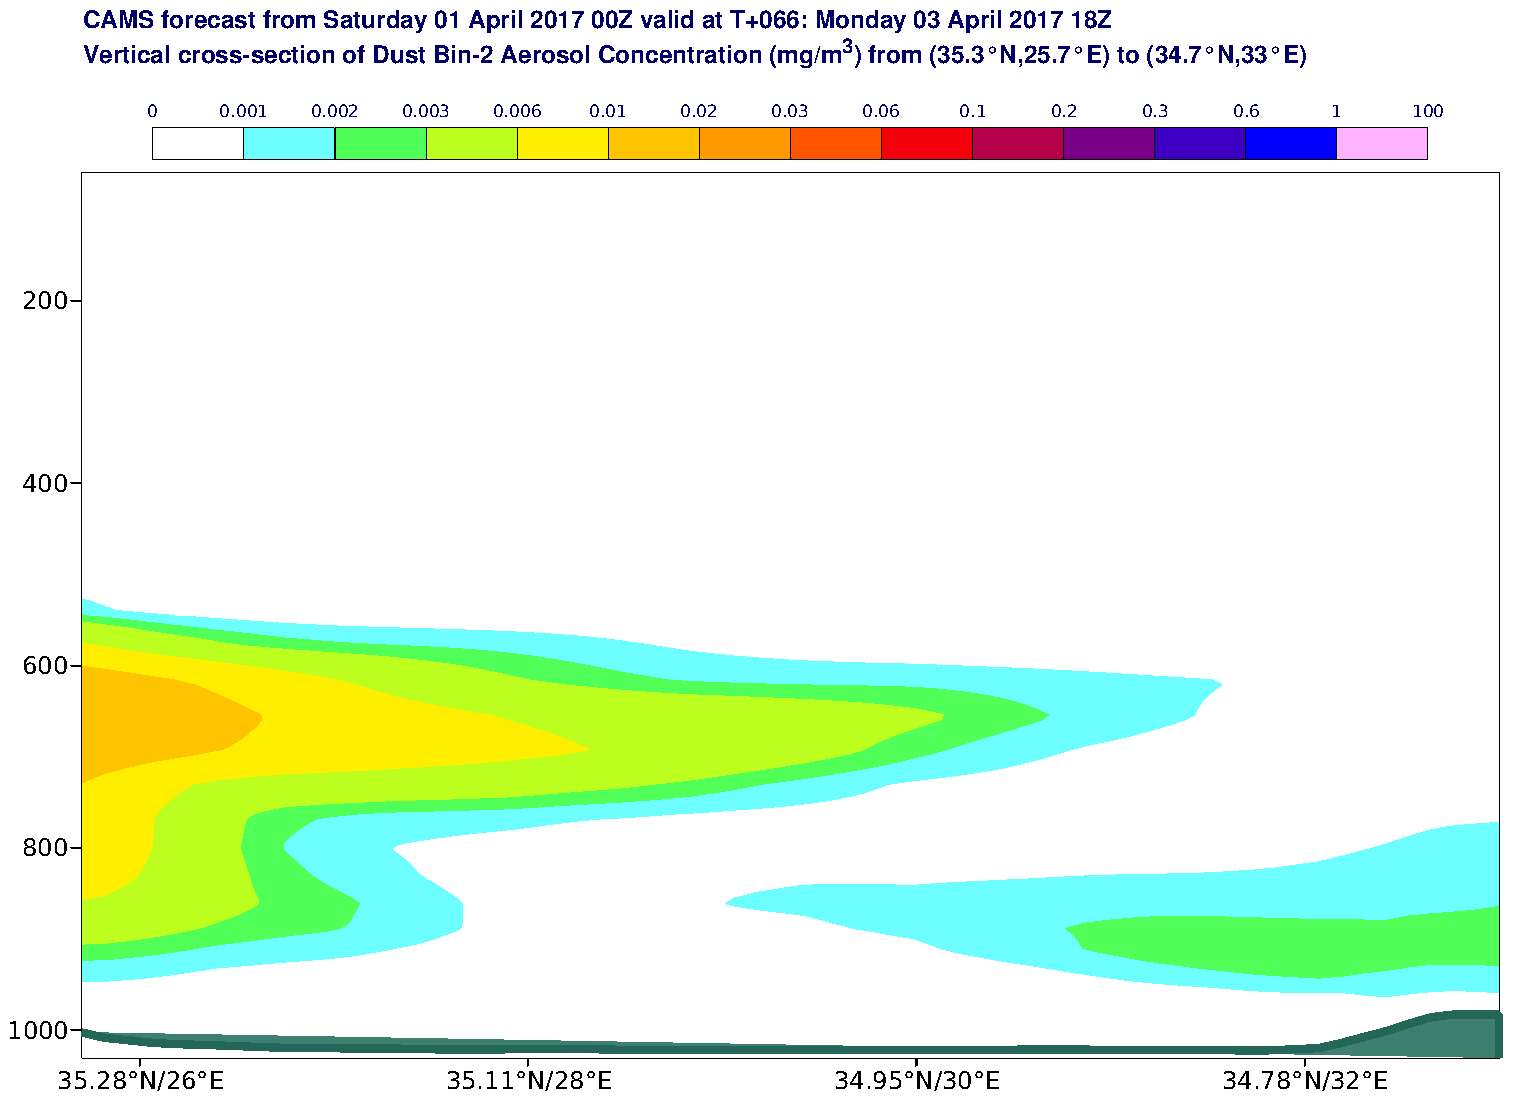 Vertical cross-section of Dust Bin-2 Aerosol Concentration (mg/m3) valid at T66 - 2017-04-03 18:00